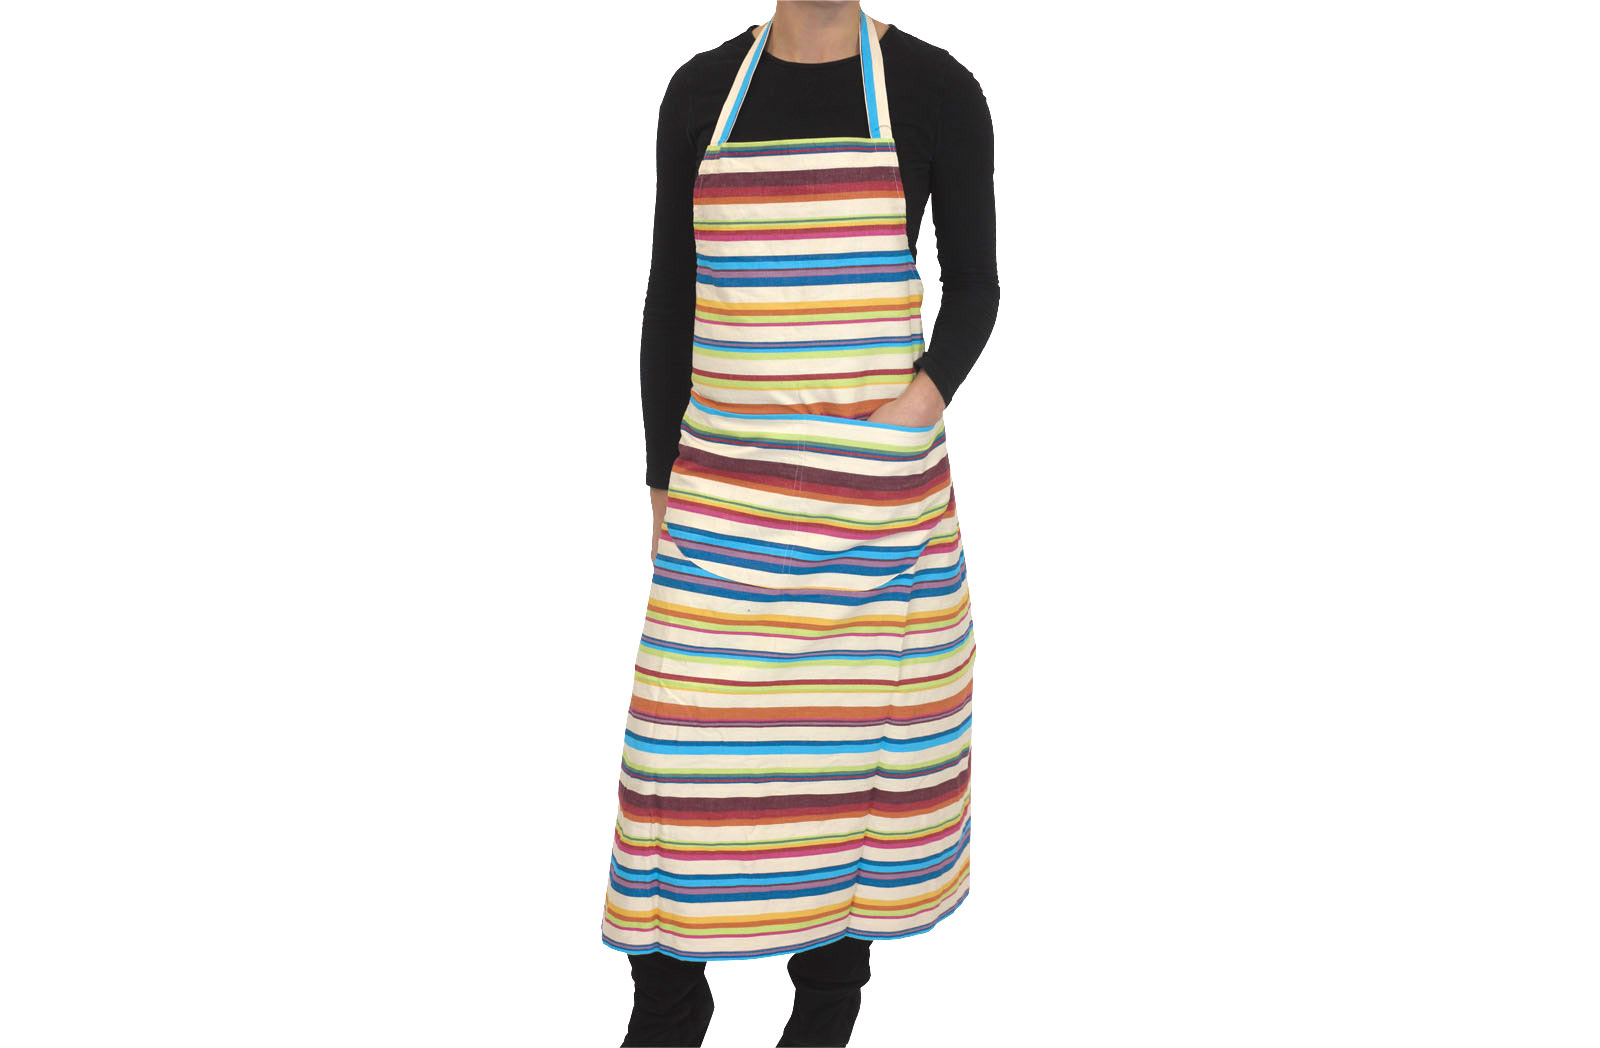 Cream Striped Aprons - cream, brown, terracotta, green, turquoise, blue, purple, pink, yellow stripes